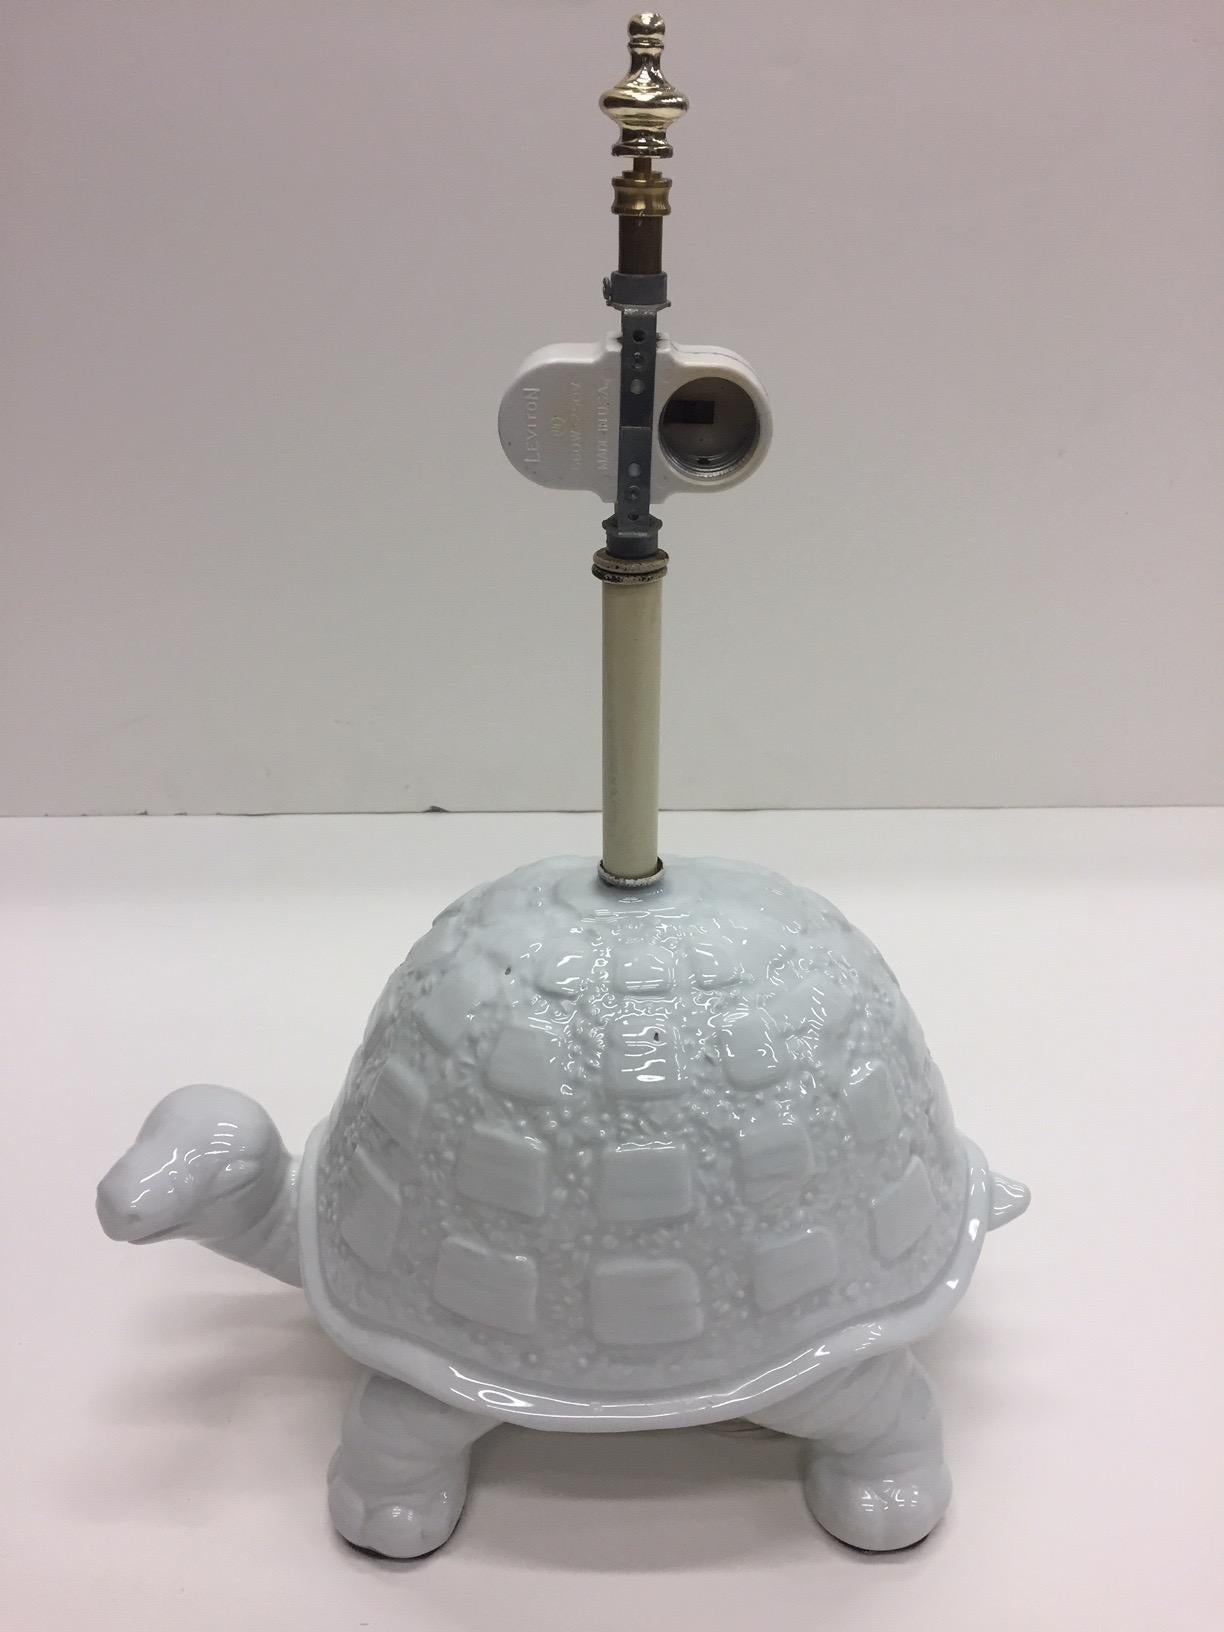 A wonderful decorative table lamp in the shape of a curious white ceramic turtle. Shade not included.